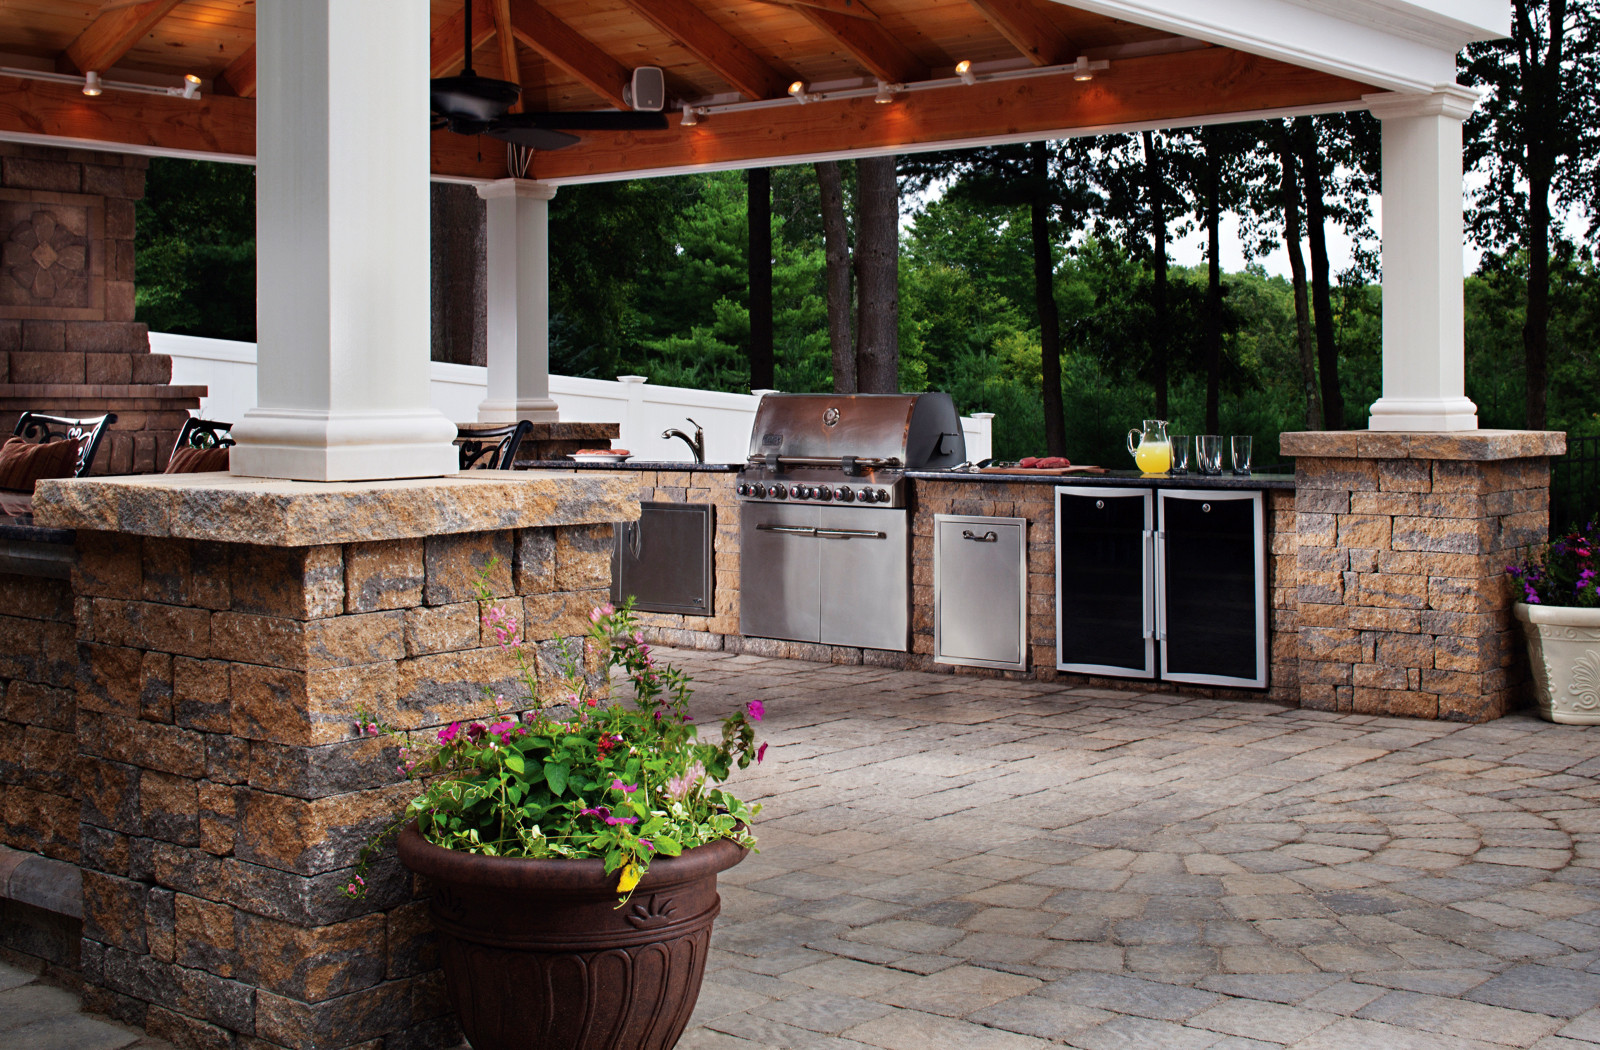 Outdoor Kitchen Designs
 Find Out What s Cooking in the Latest Outdoor Kitchen